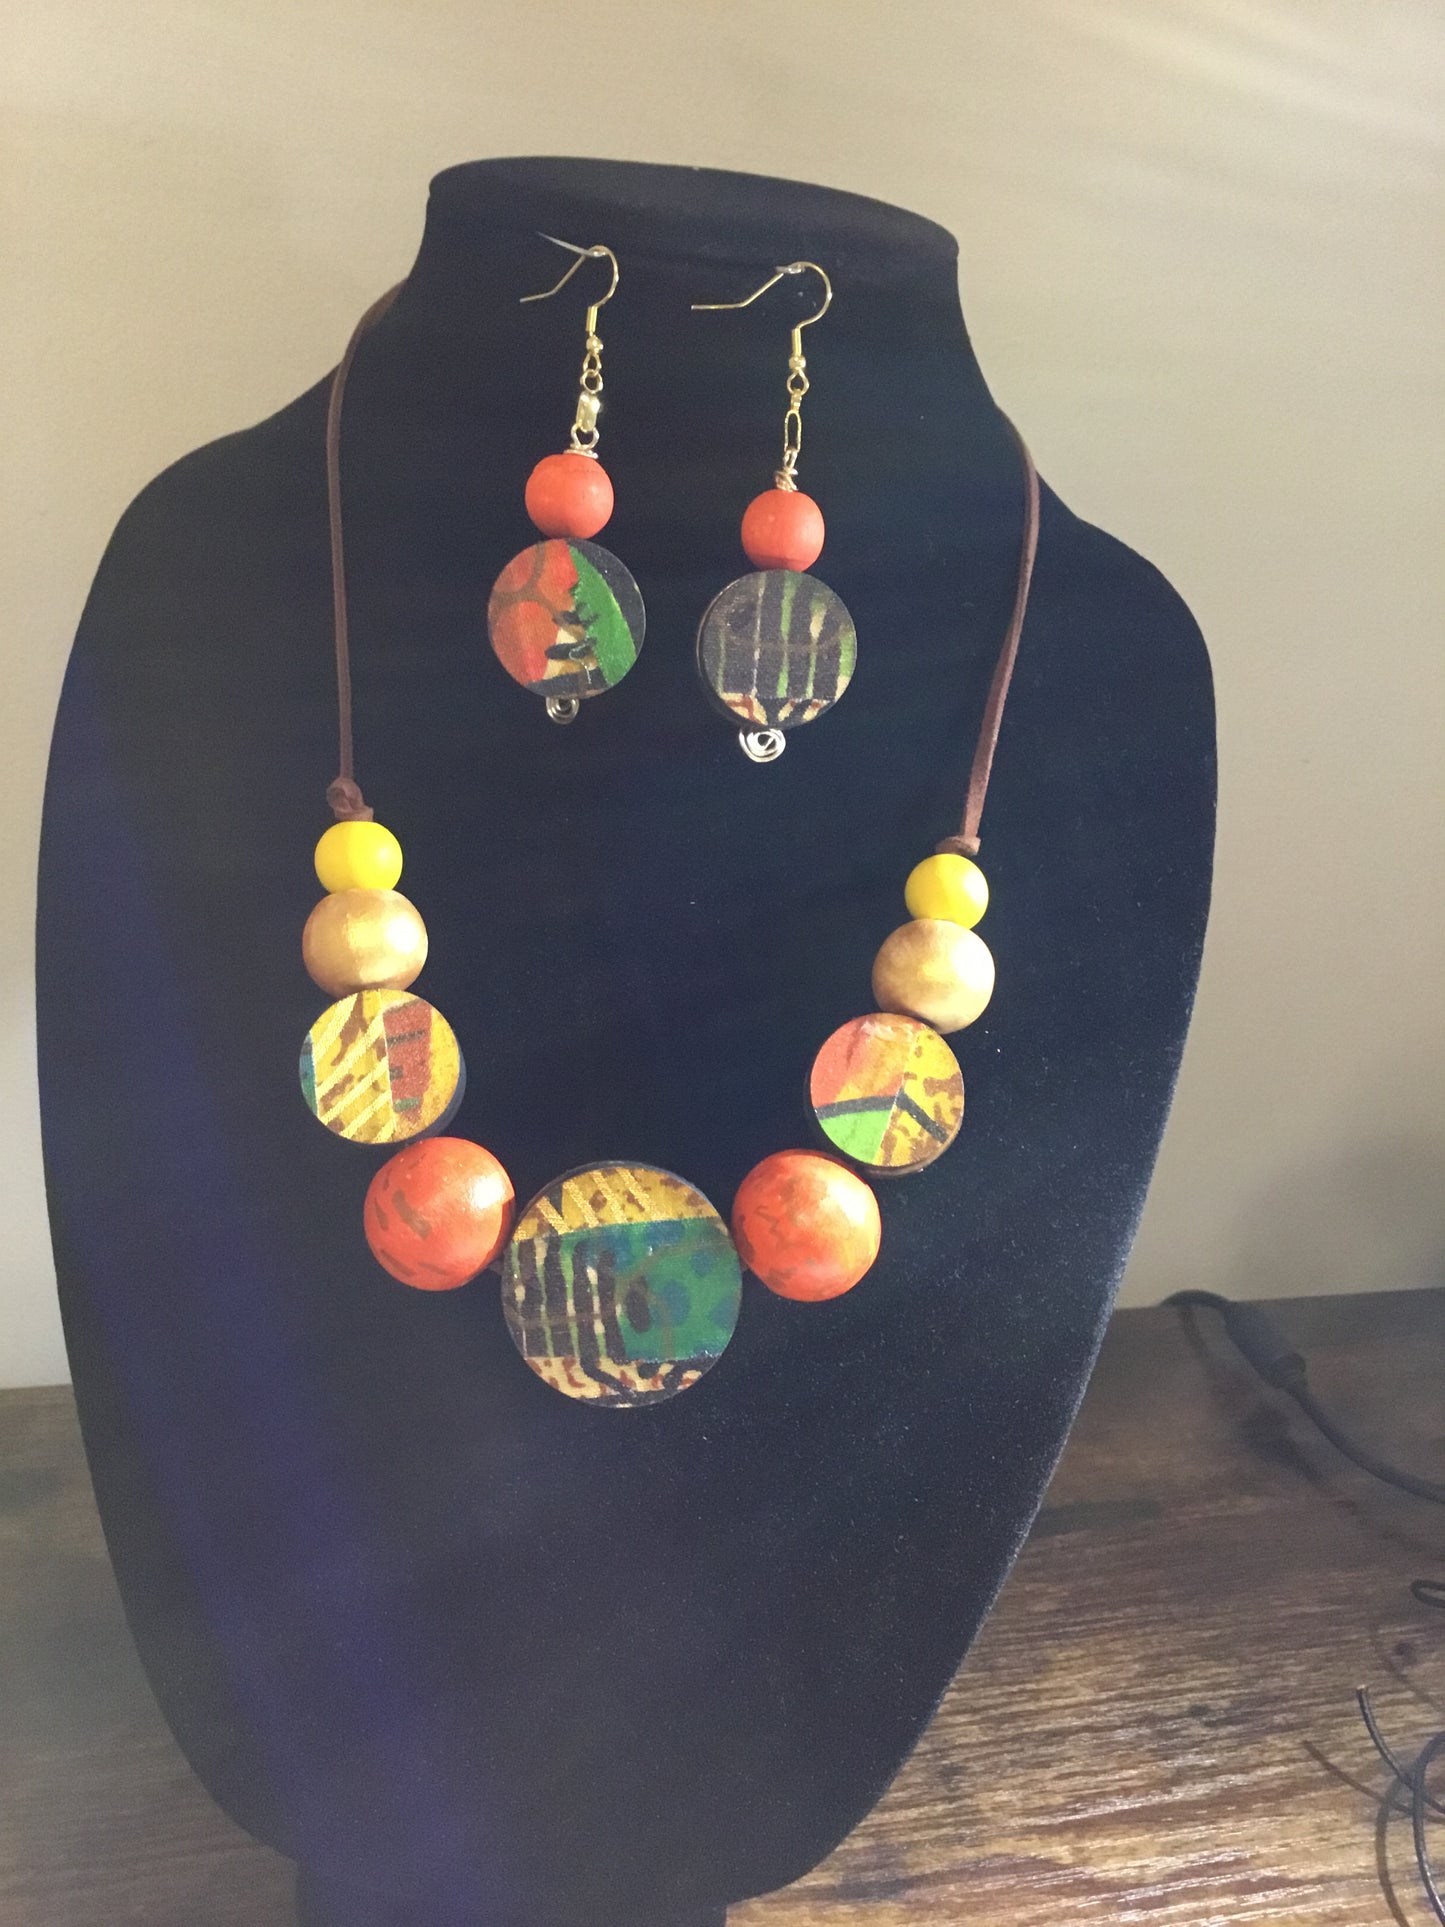 One of a Kind Beaded Necklace-Handmade Beads Orange/Yellow African Print